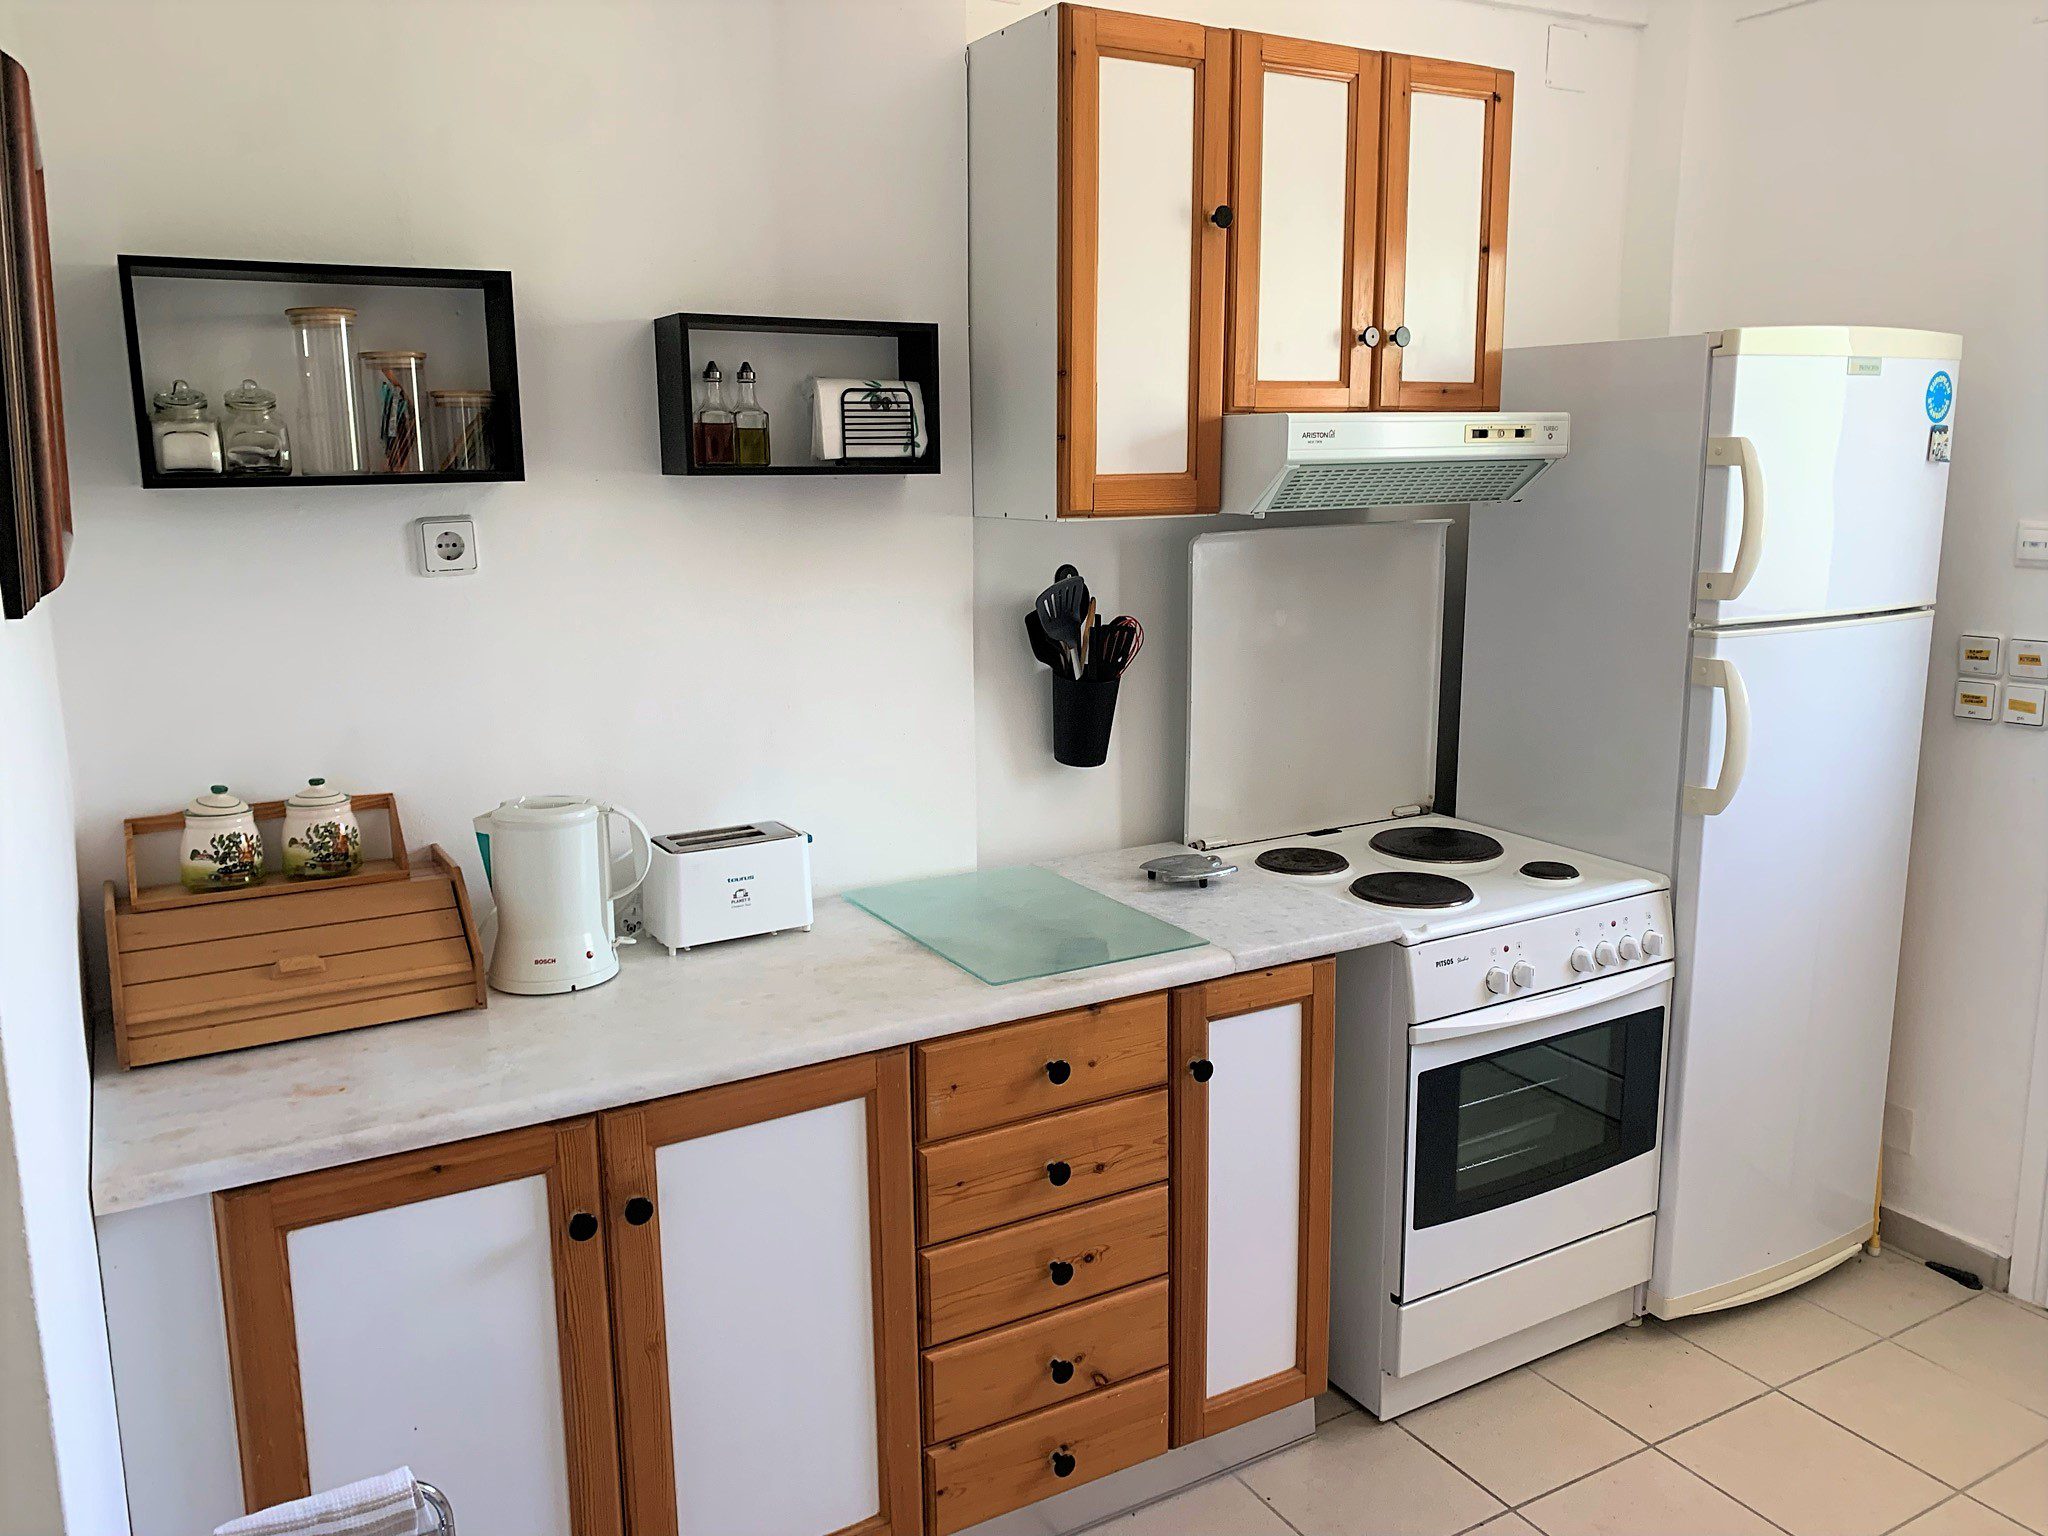 Kitchen of house for rent in Ithaca Greece Stavros